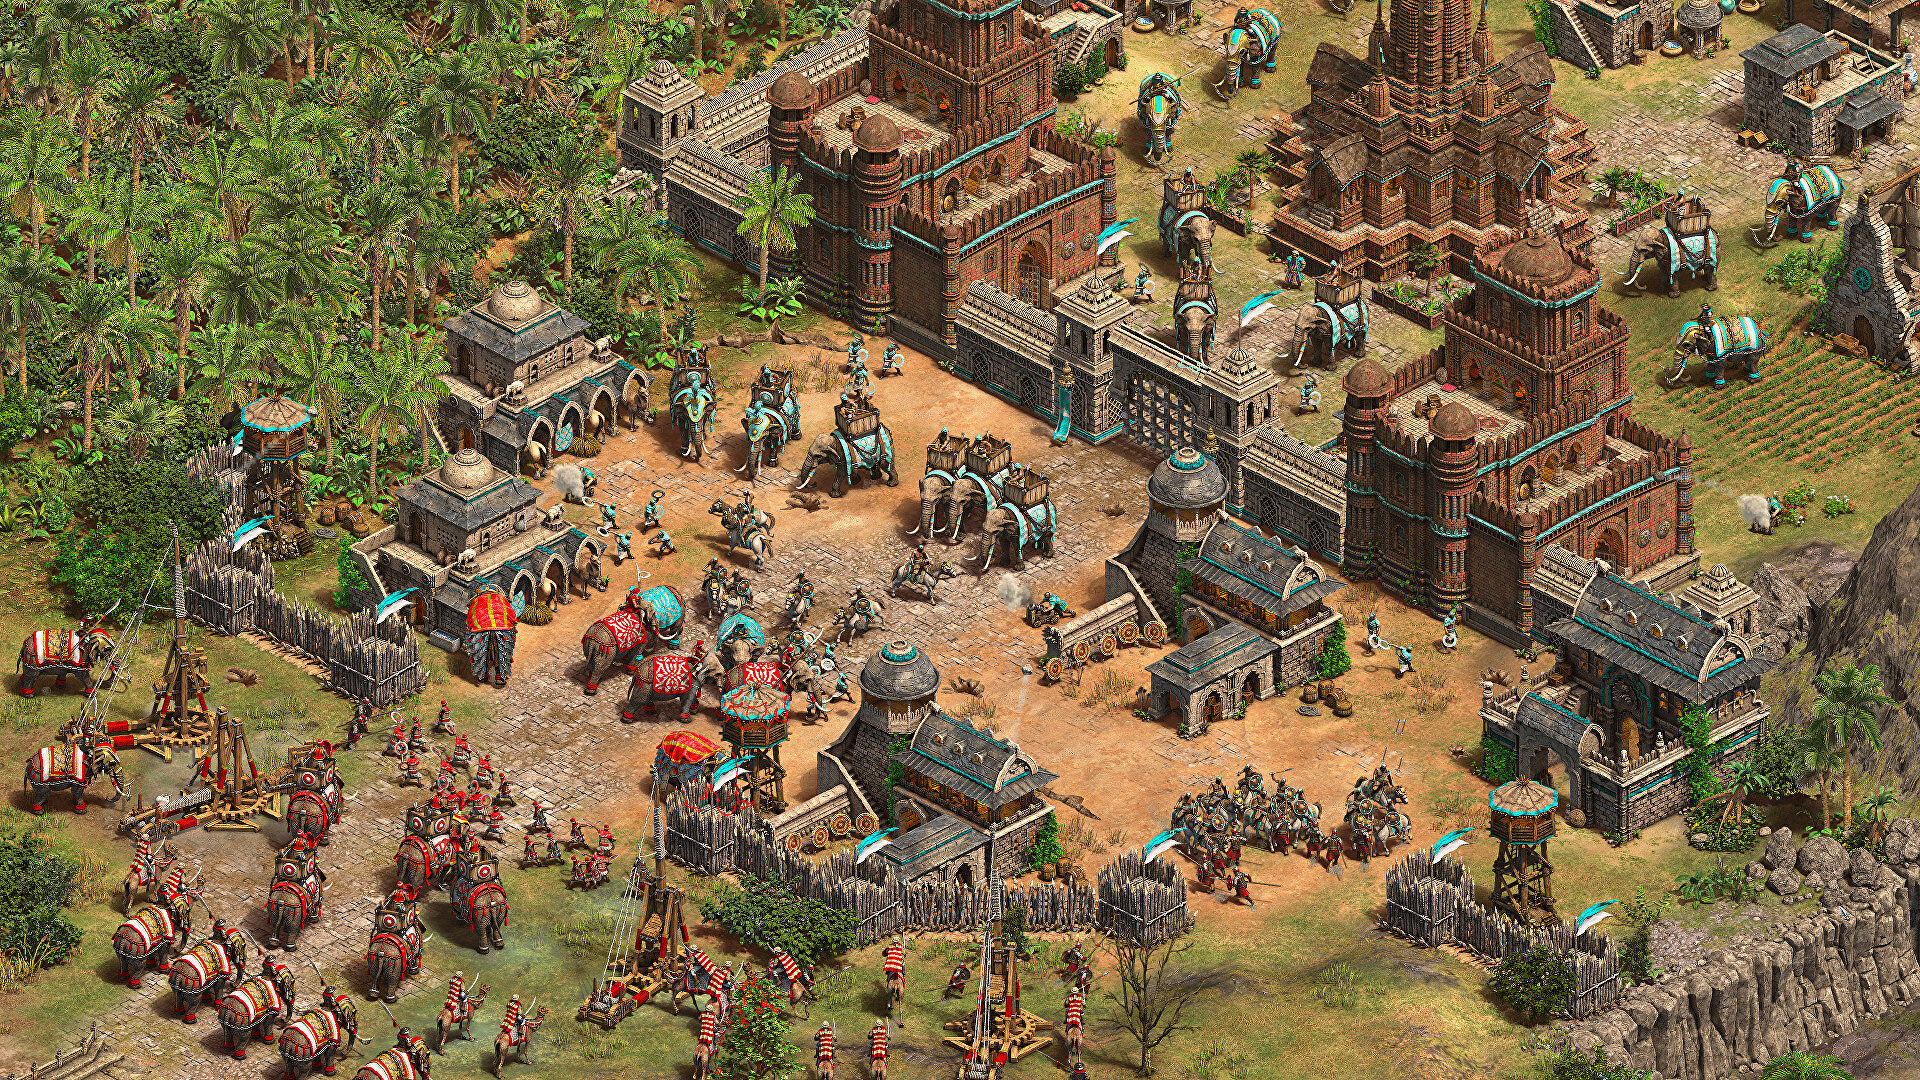 Age Of Empires 2: Definitive Edition's Dynasties Of India DLC adds lots of elephants